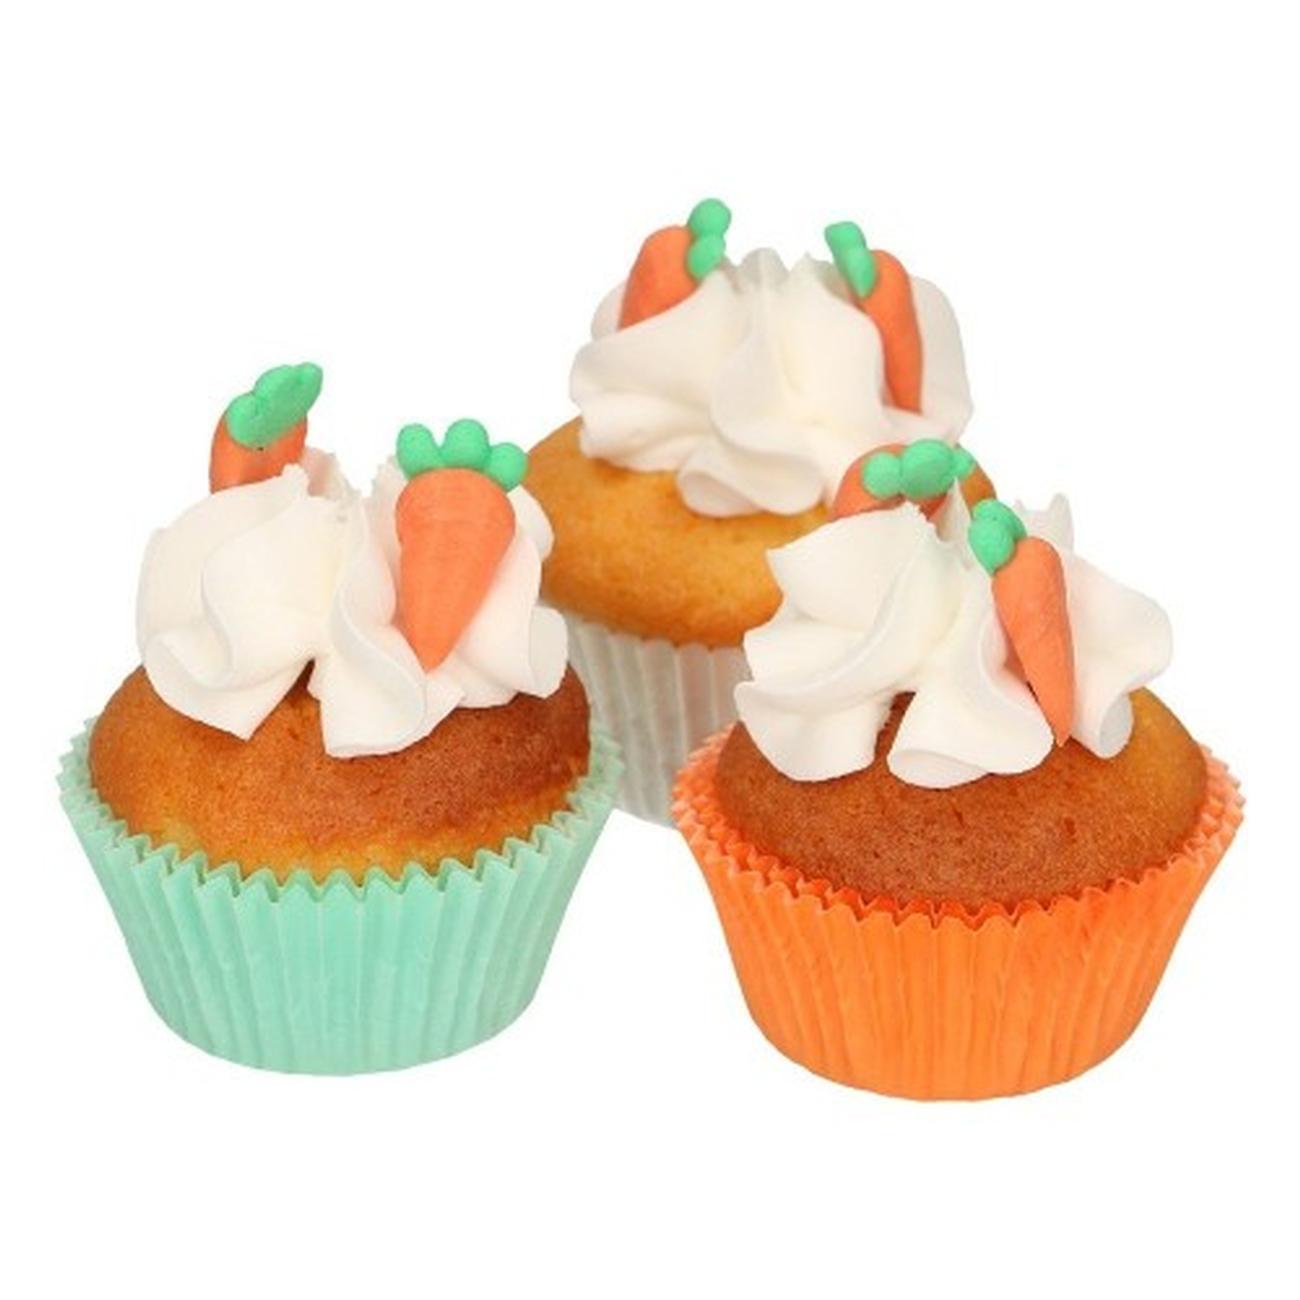 fun-cakes-sugar-decorations-easter-carrots-16pc - FunCakes Sugar Decoration Carrots 16pc